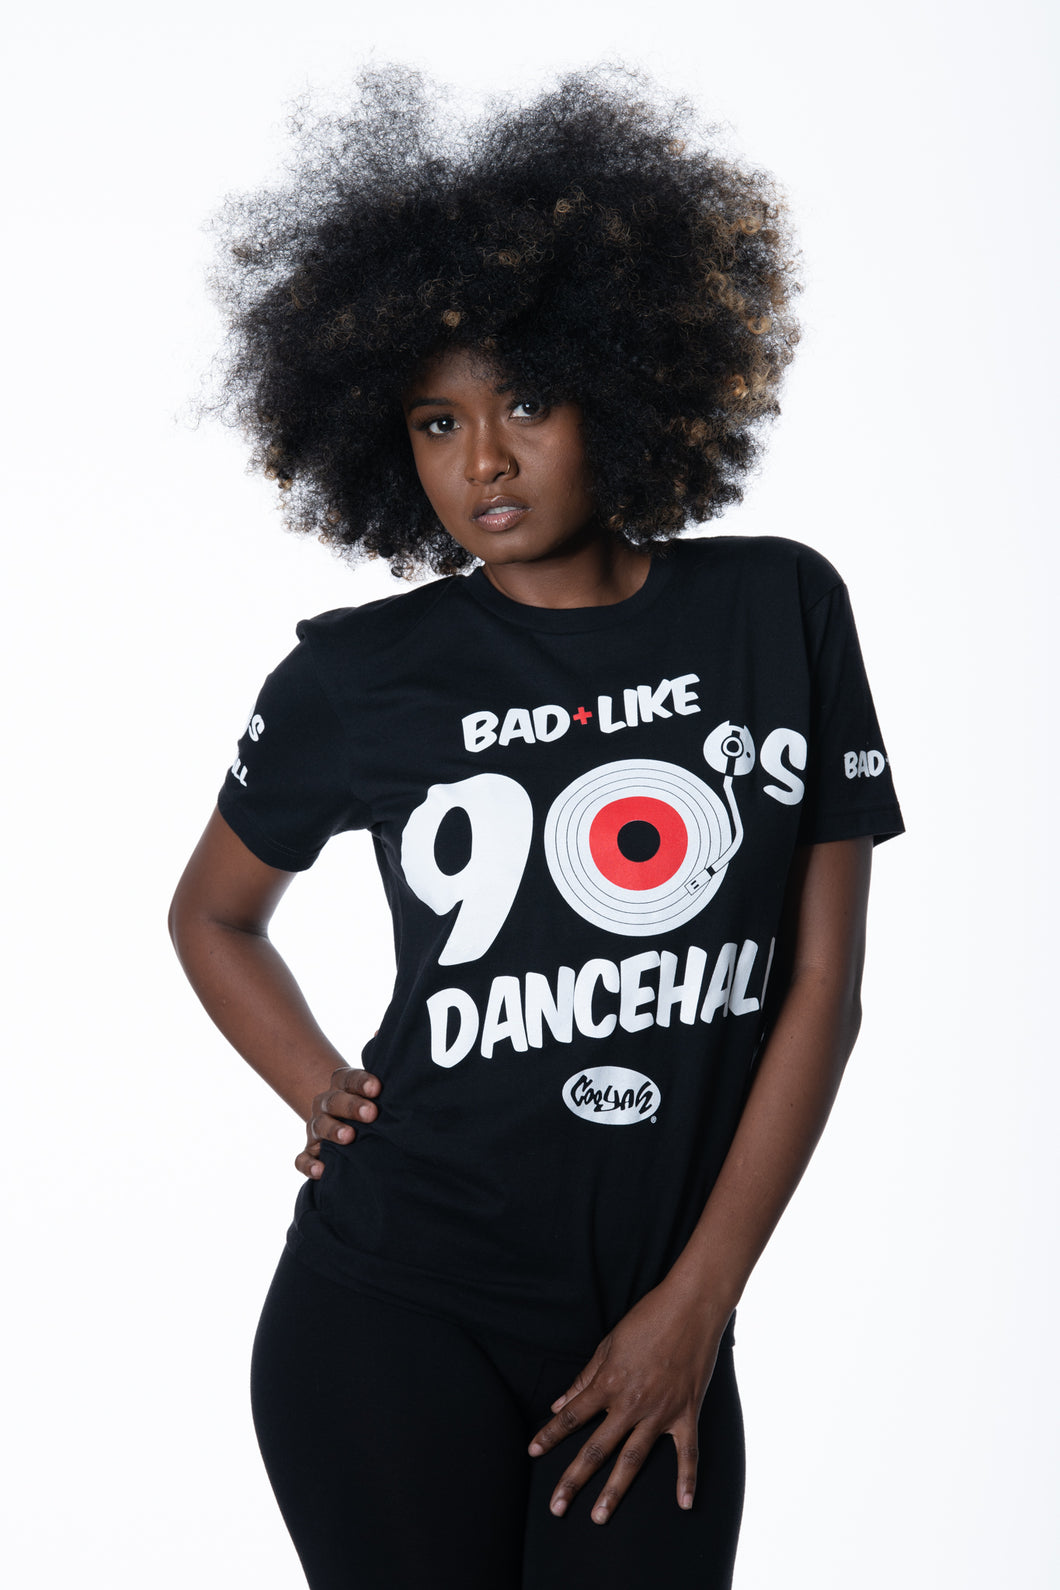 Bad Like 90's T-Shirt by Cooyah the official regae clothing brand